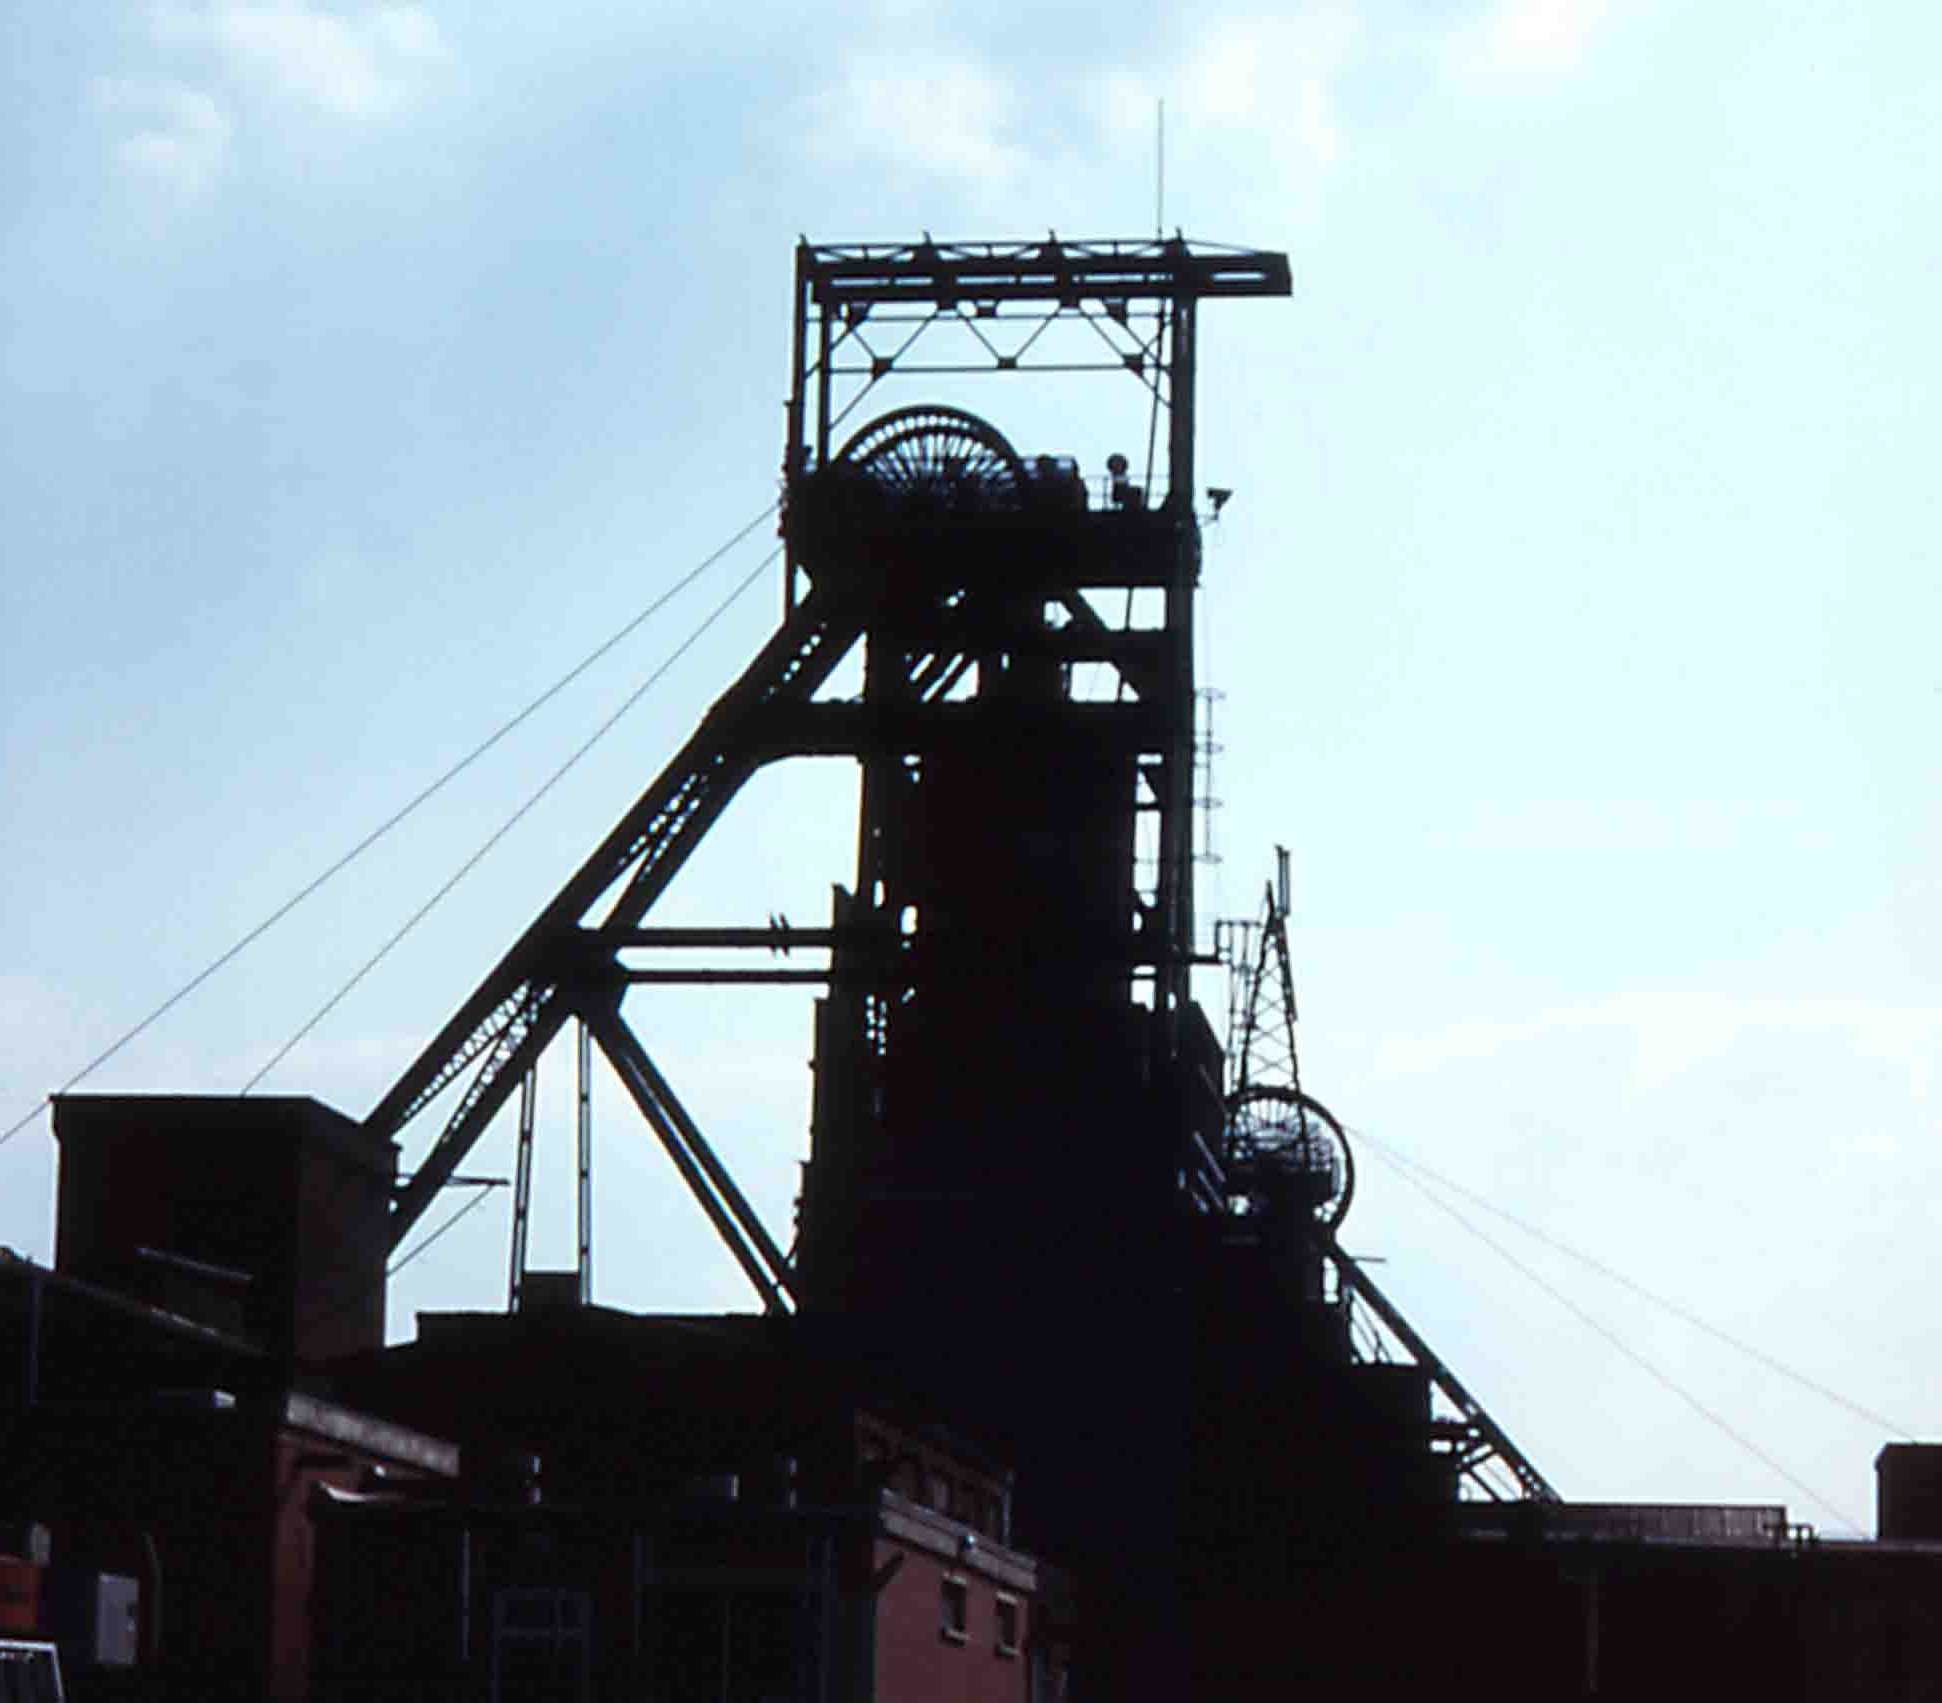 Bickershaw Colliery, Leigh. Photo by Peter Wood, 22 May 1988